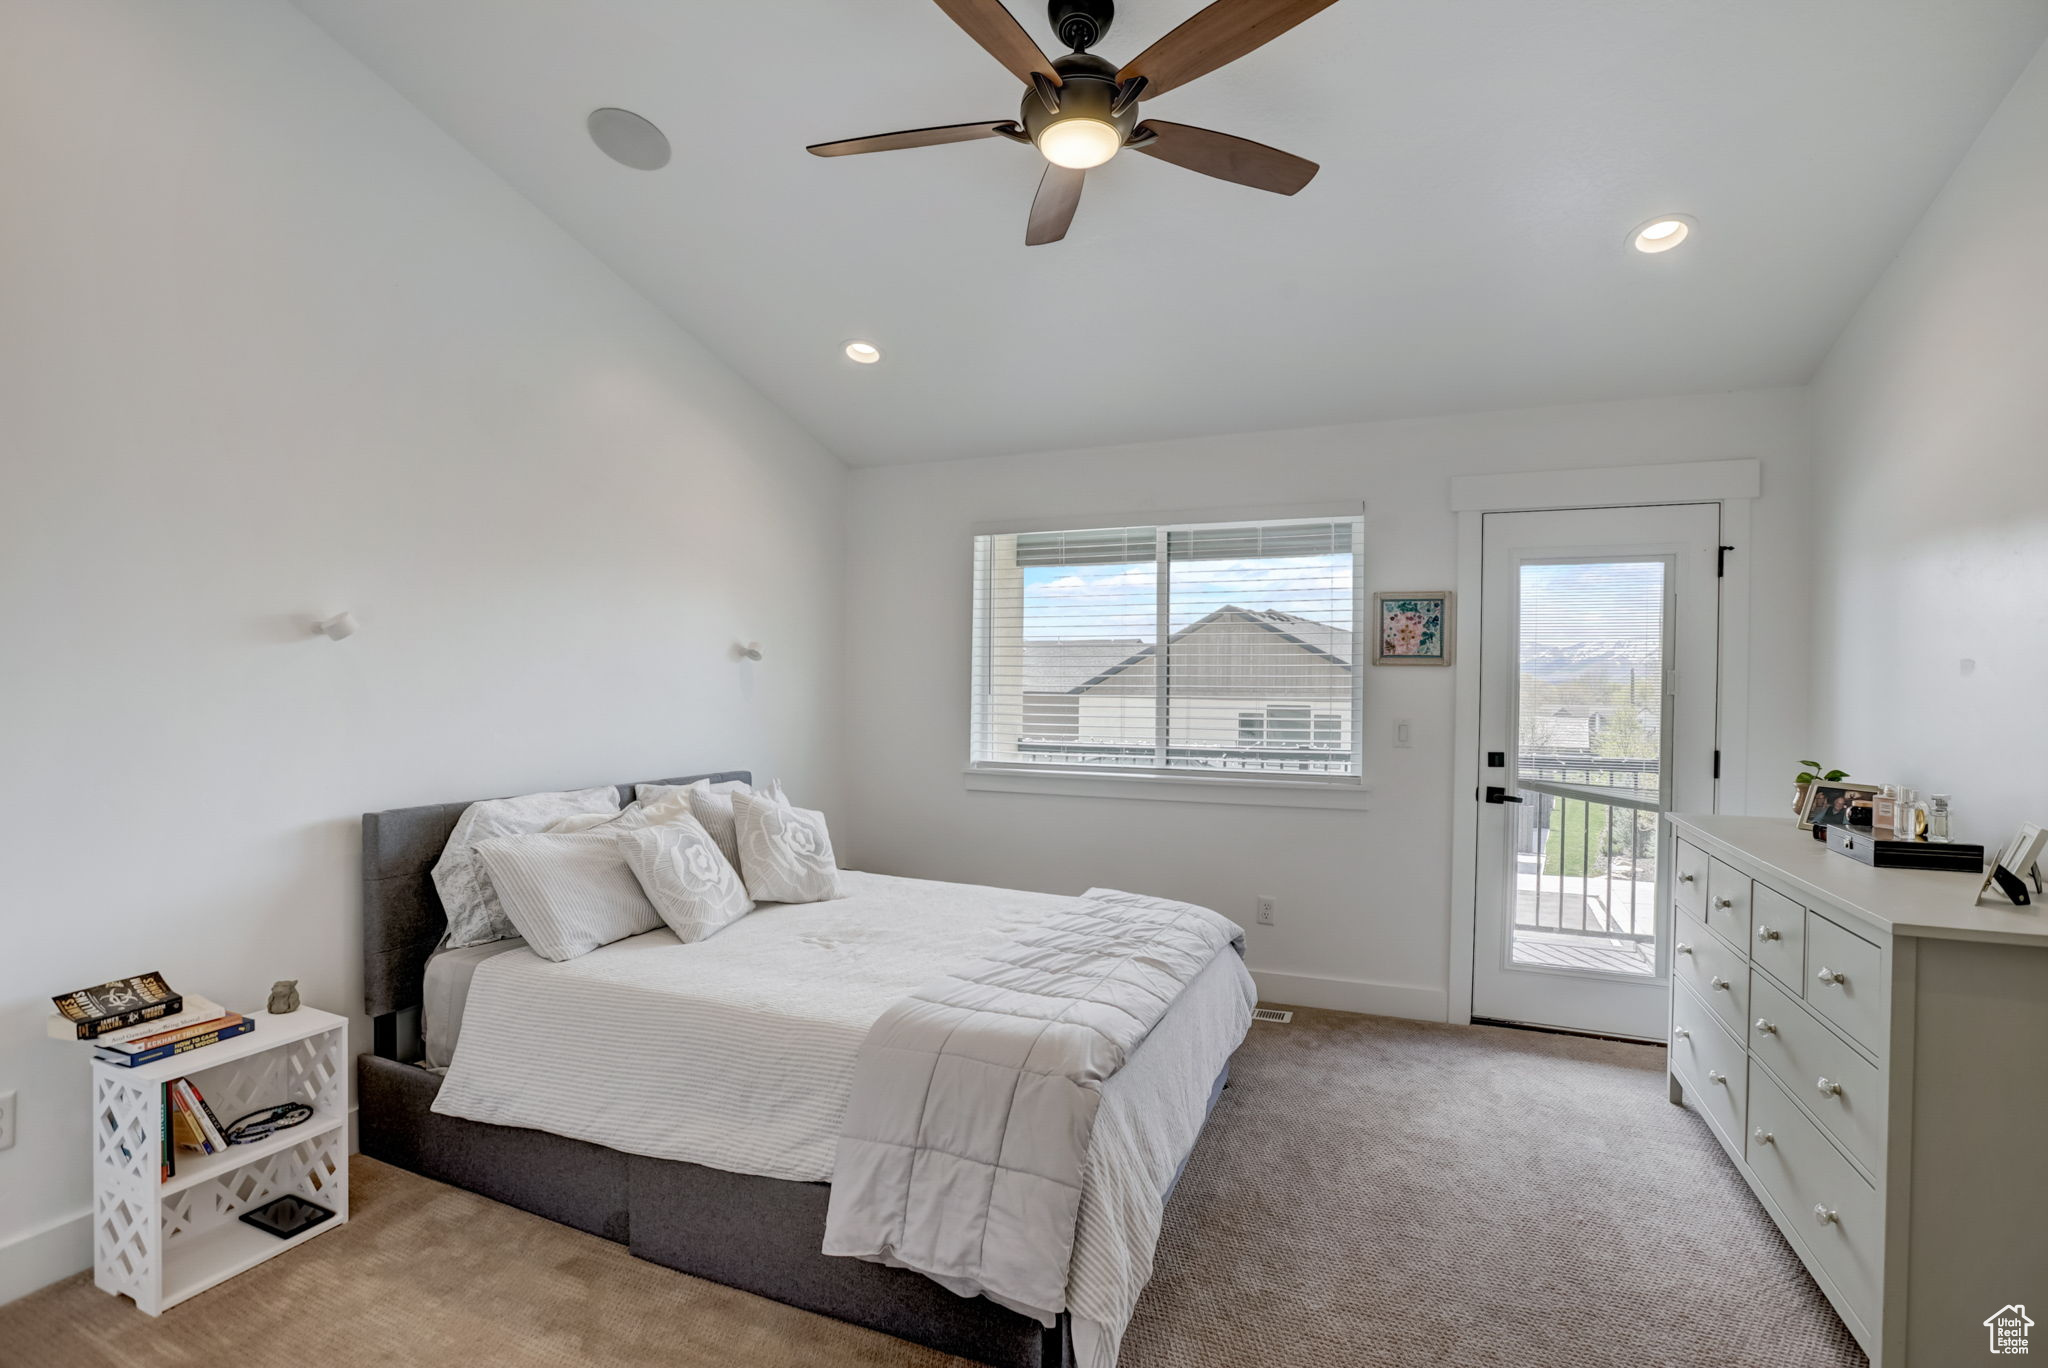 Carpeted bedroom featuring ceiling fan, vaulted ceiling, and access to exterior